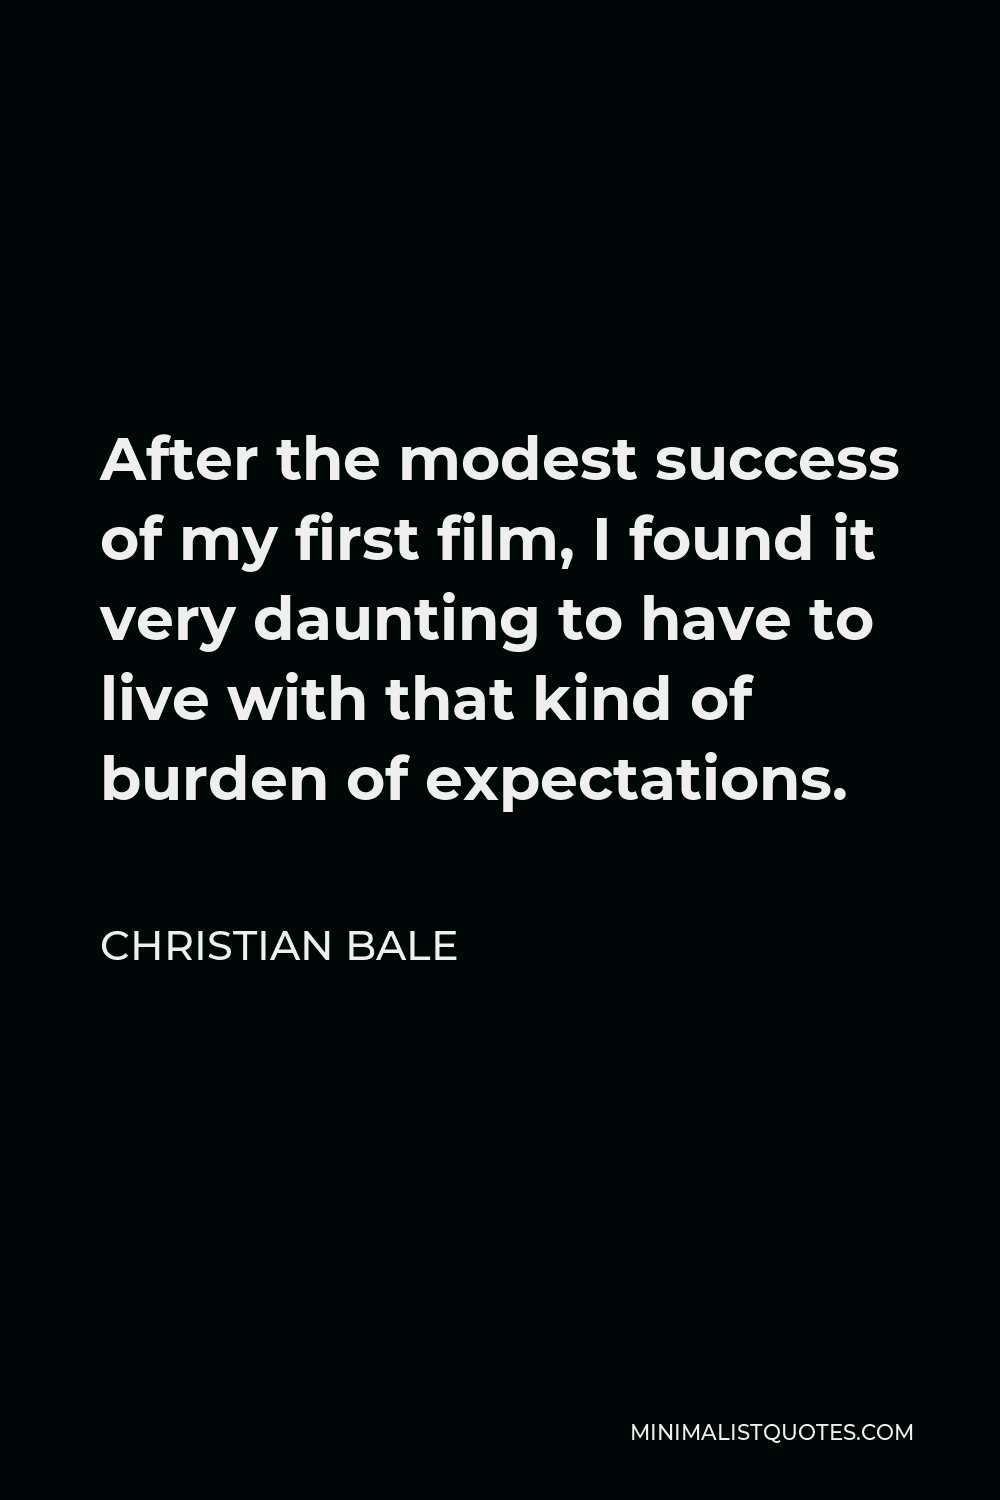 Christian Bale Quote - After the modest success of my first film, I found it very daunting to have to live with that kind of burden of expectations.